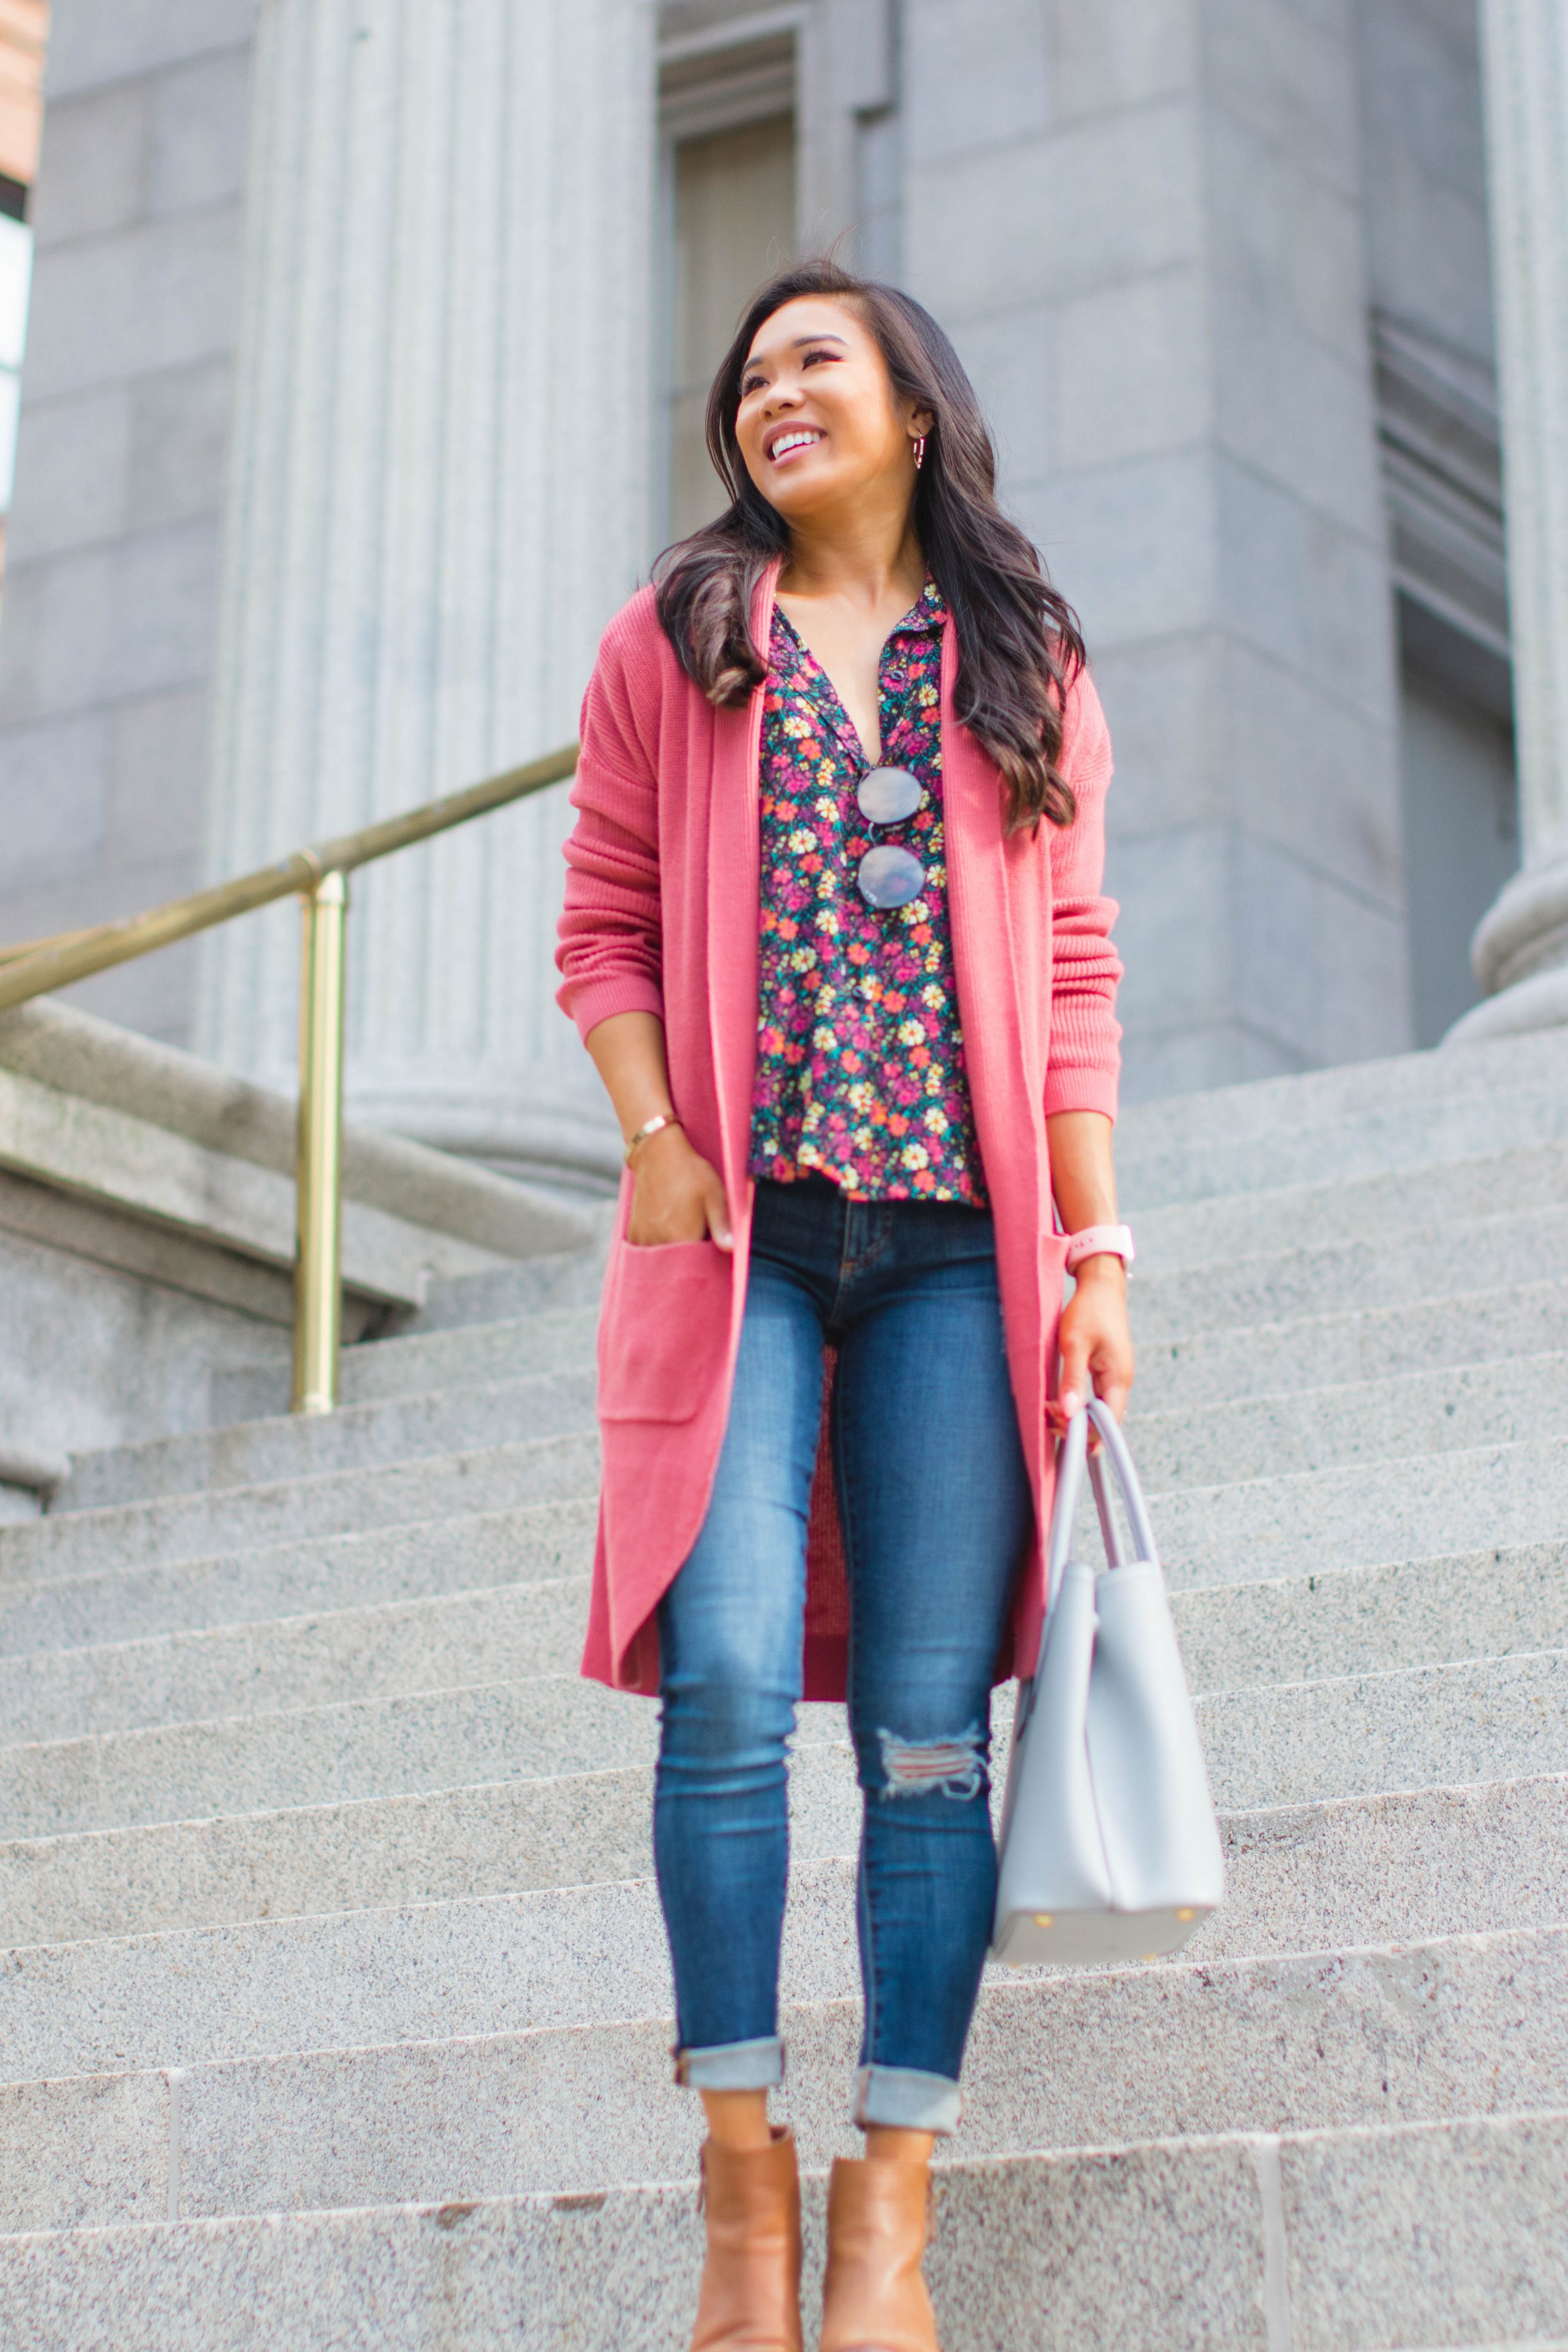 Fall outfit idea with dark florals and booties